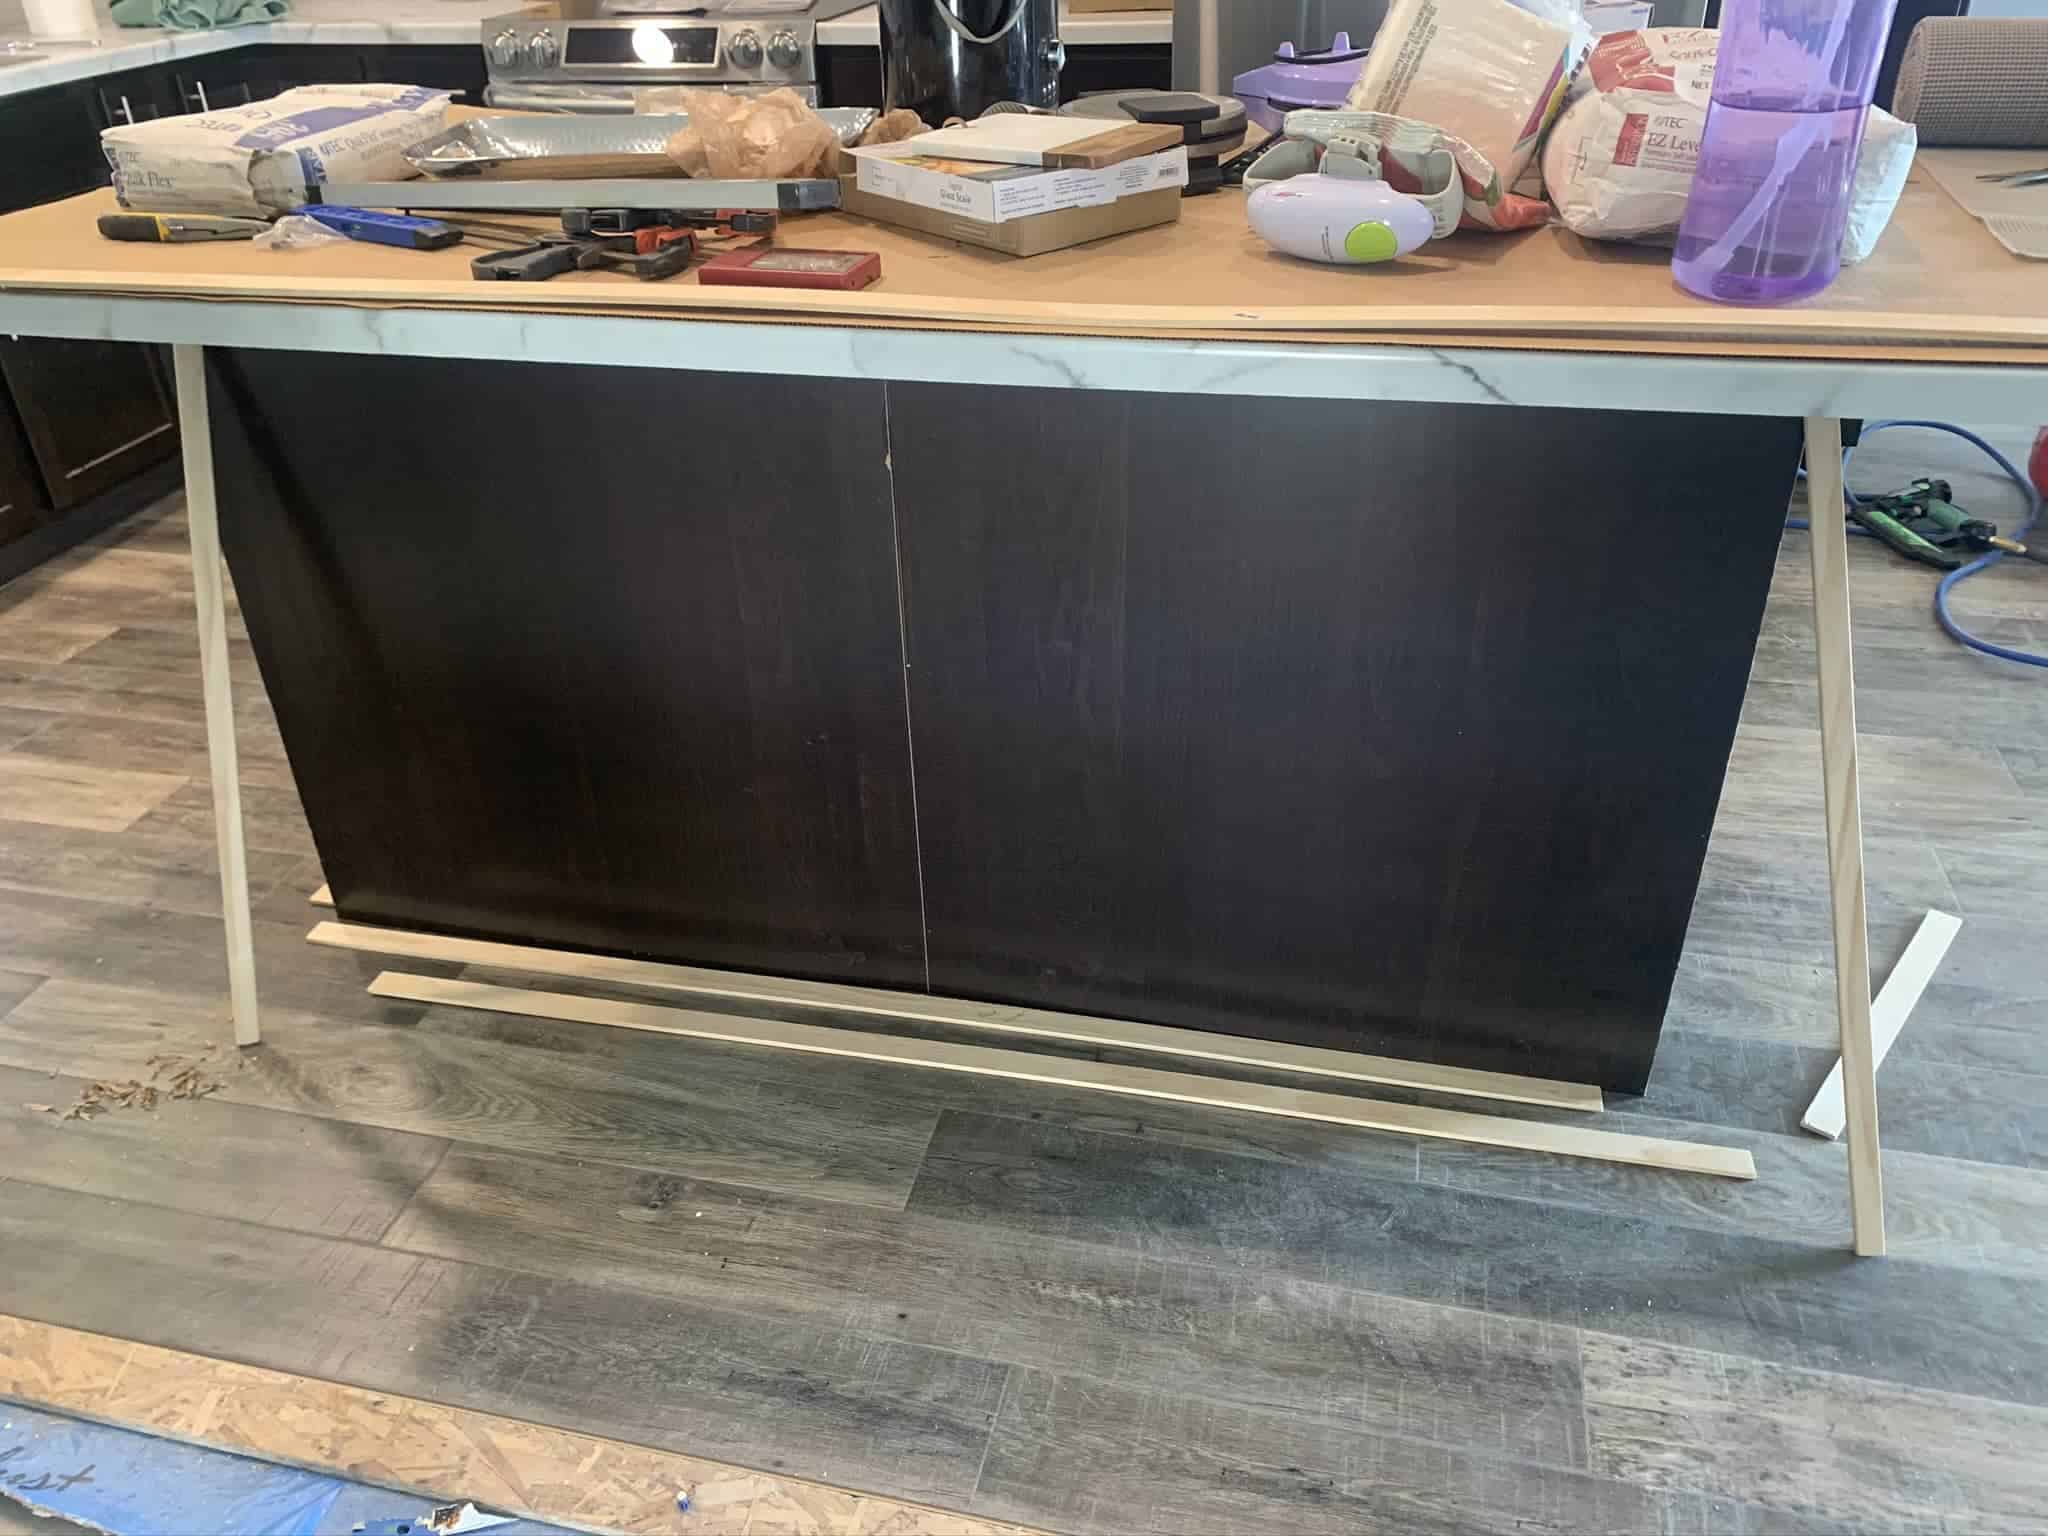 How To Finish The Back Panel of A Kitchen Island In 3 Easy Steps – DIY